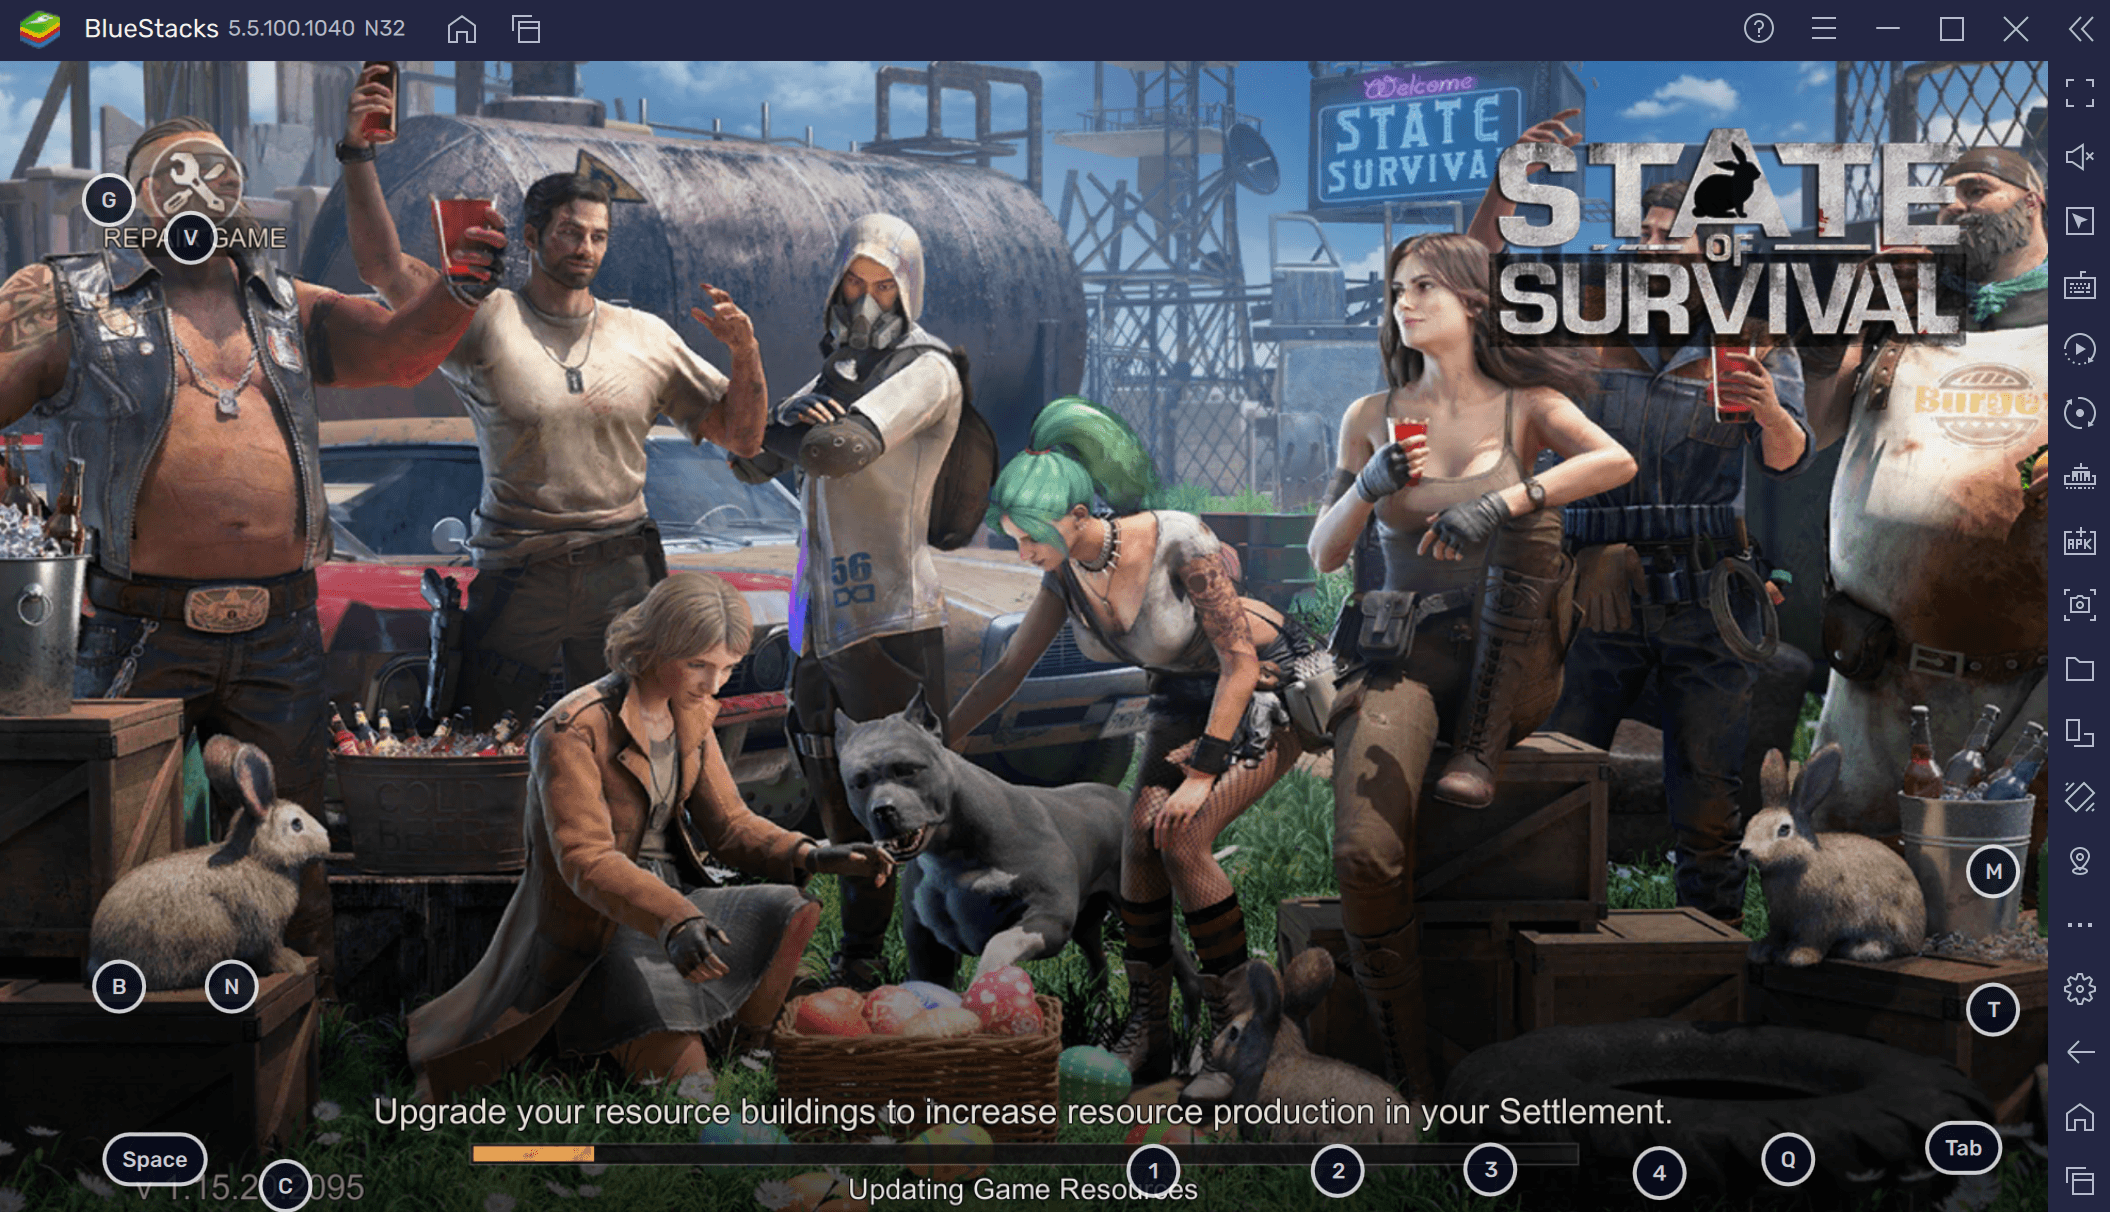 Easter Events Have Arrived In State of Survival Version 1.15.20